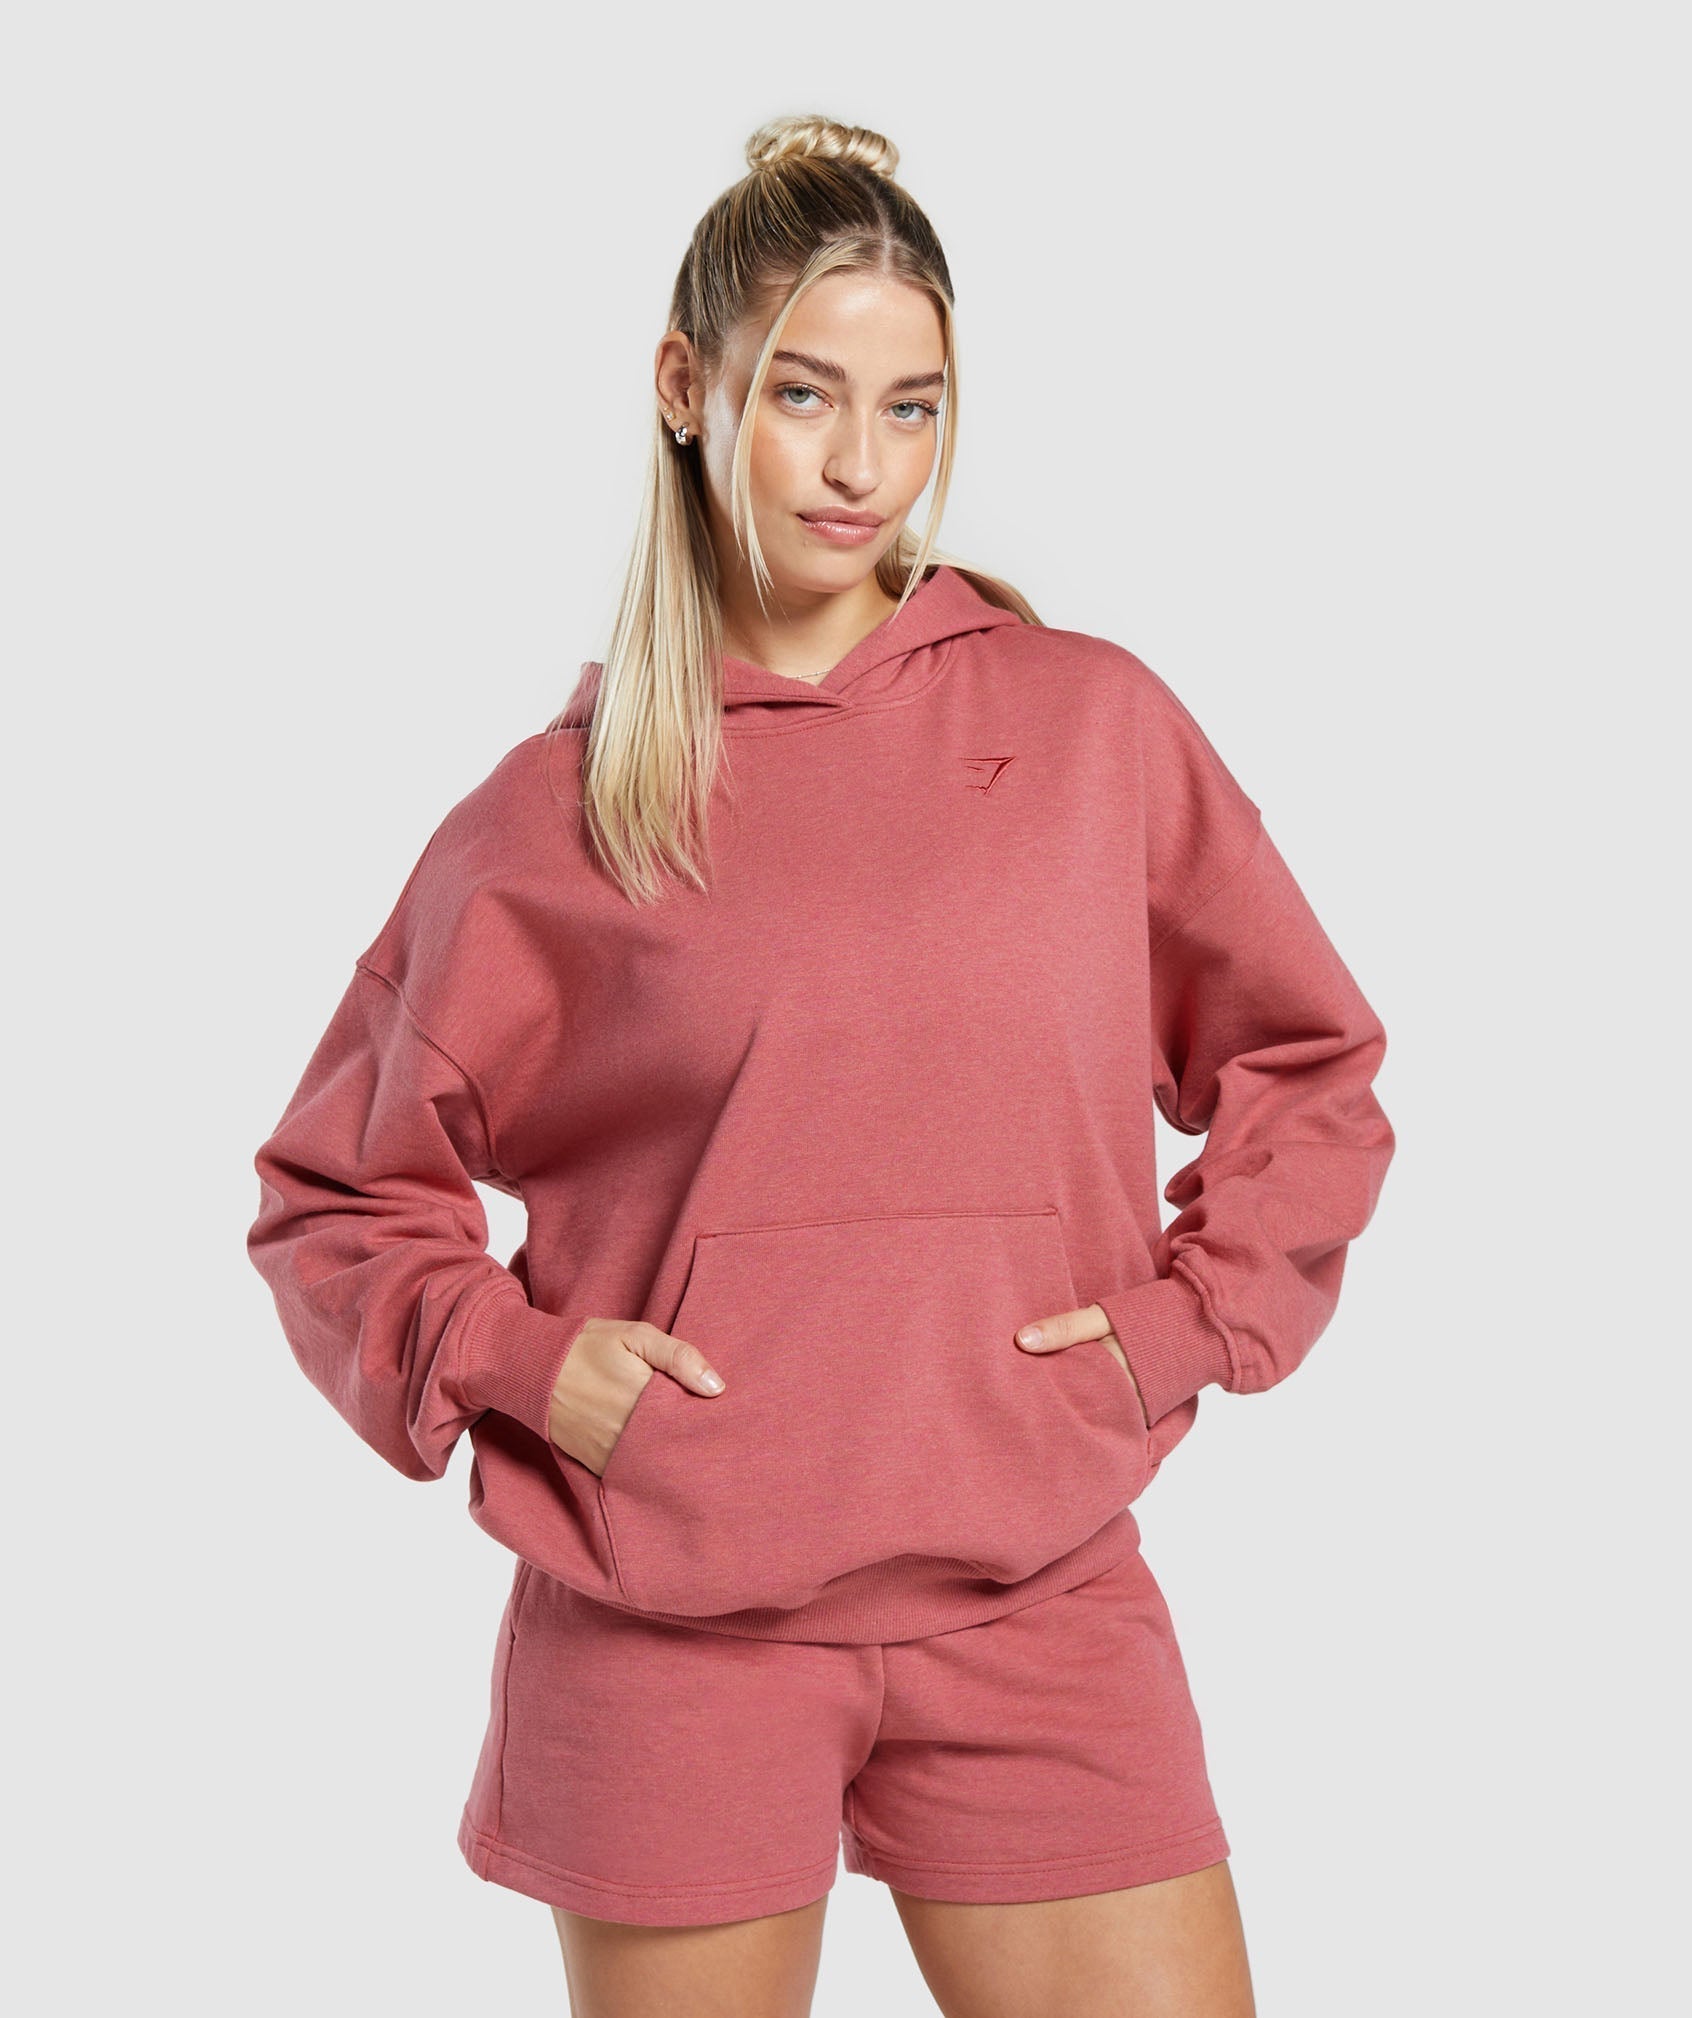 Rest Day Sweats Hoodie in Heritage Pink Marl